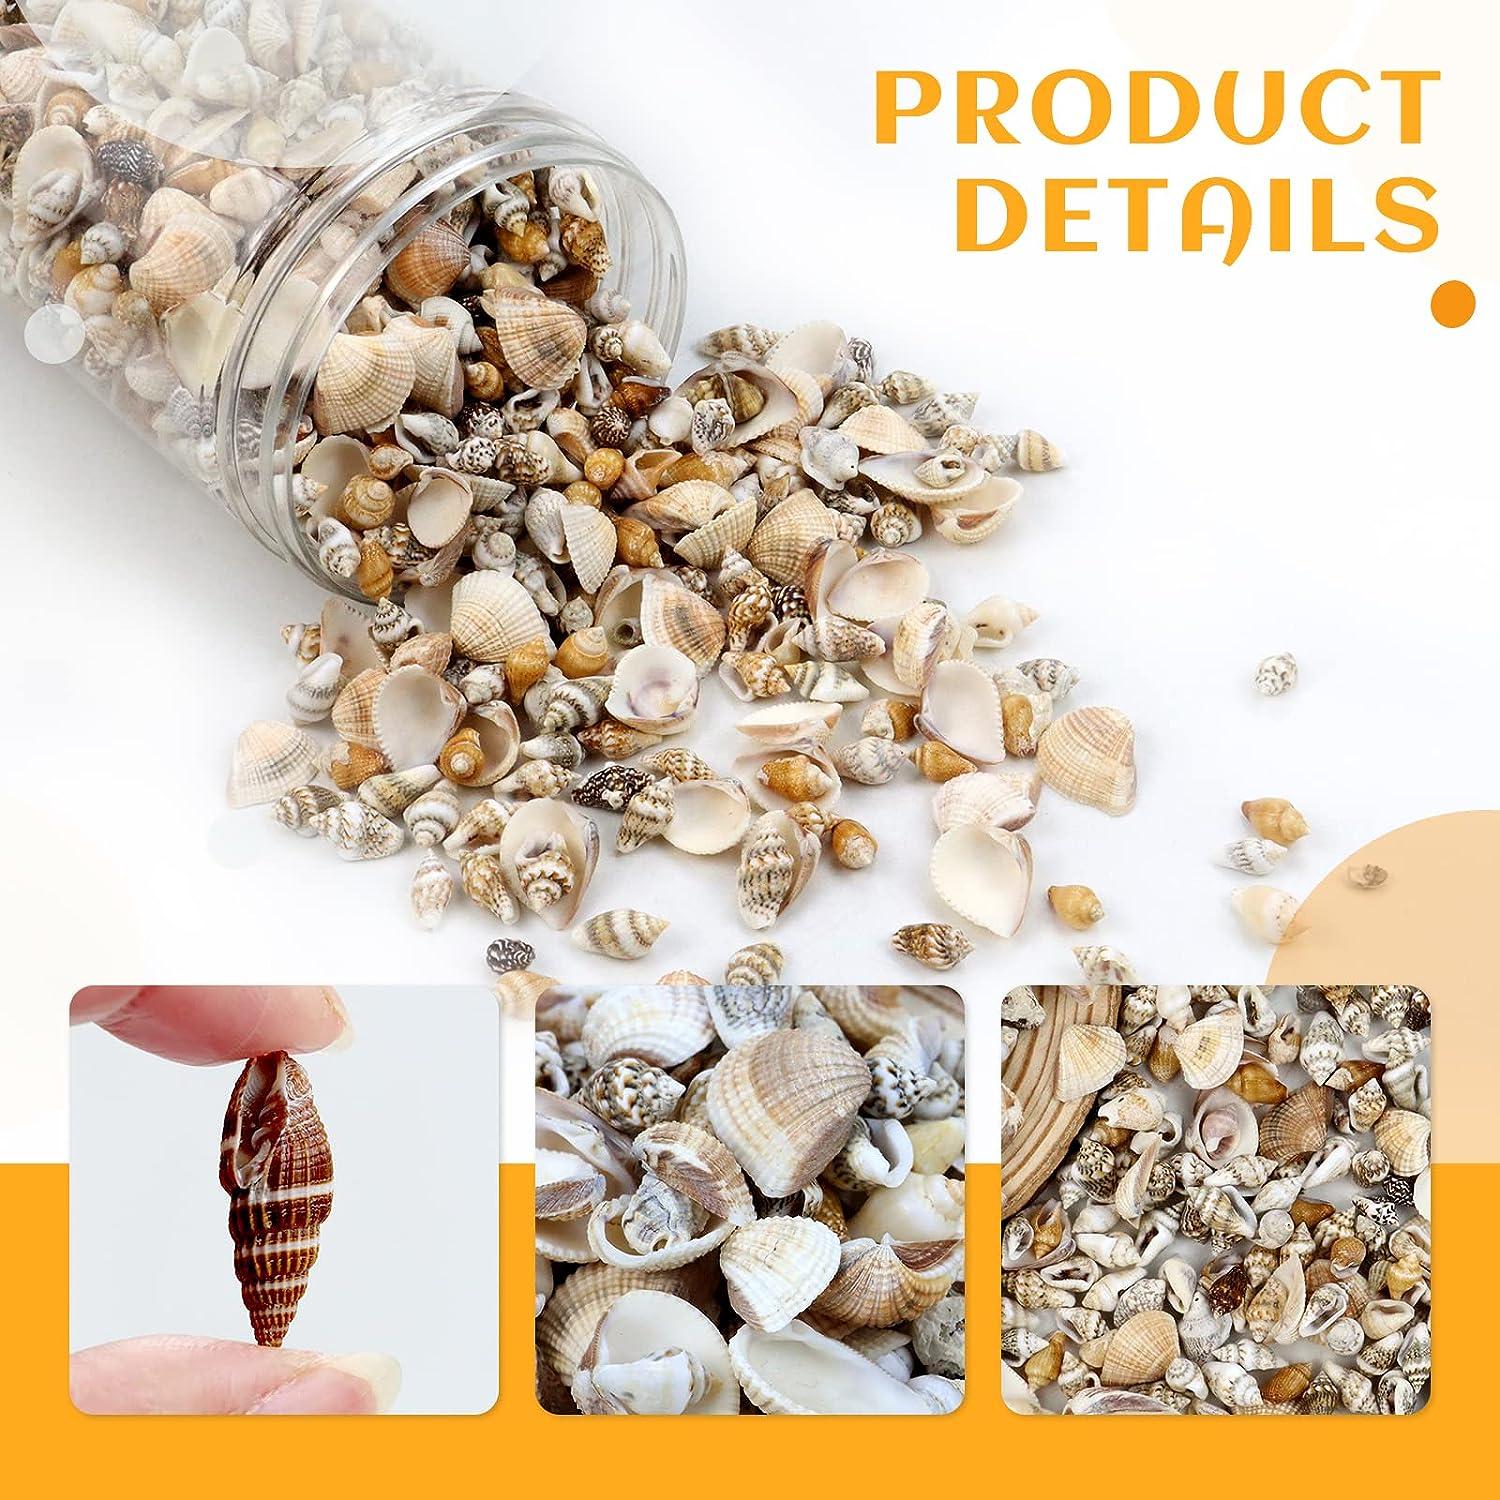 WEOXPR Mixed Sea Shells, 100+ Pcs Beach Seashells Starfish, Various Sizes  Ocean Seashells for Fish Tank Vase Fillers, Beach Theme Party Wedding  Decor, Candle Making, DIY Crafts, Home Decorations